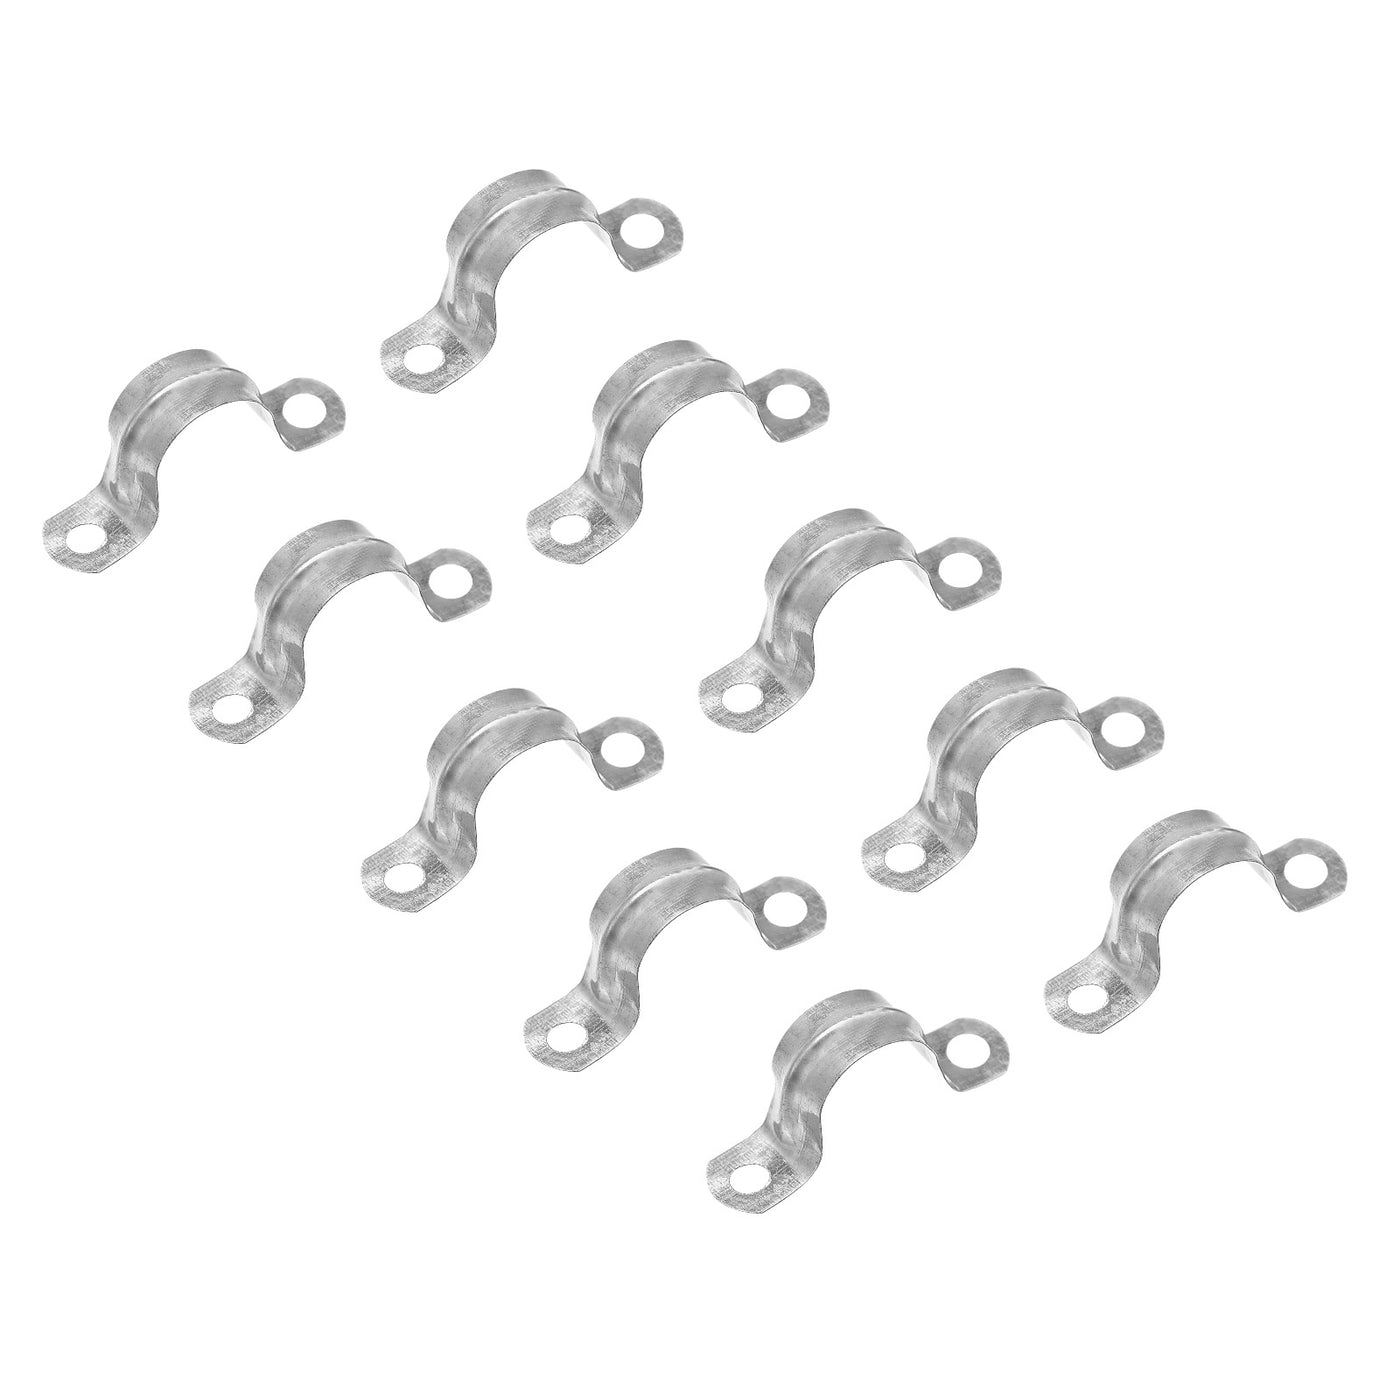 uxcell Uxcell Rigid Pipe Strap 24pcs 5/8" (16mm) Carbon Steel U Bracket Tension Tube Clamp